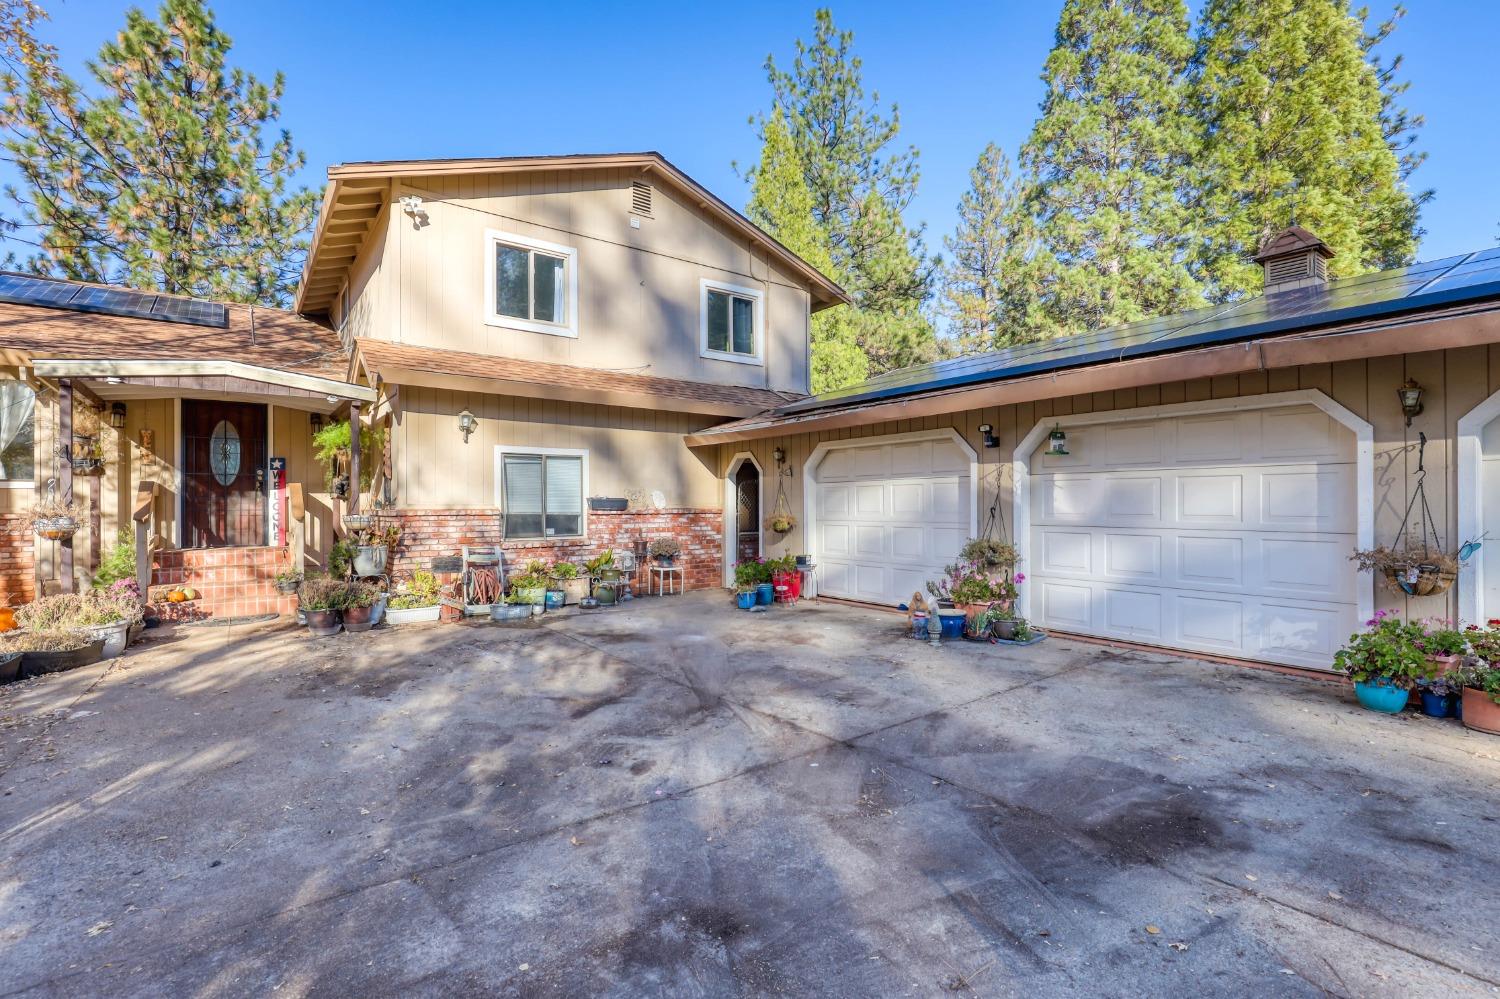 Photo of 4280 Leisure Ln in Placerville, CA